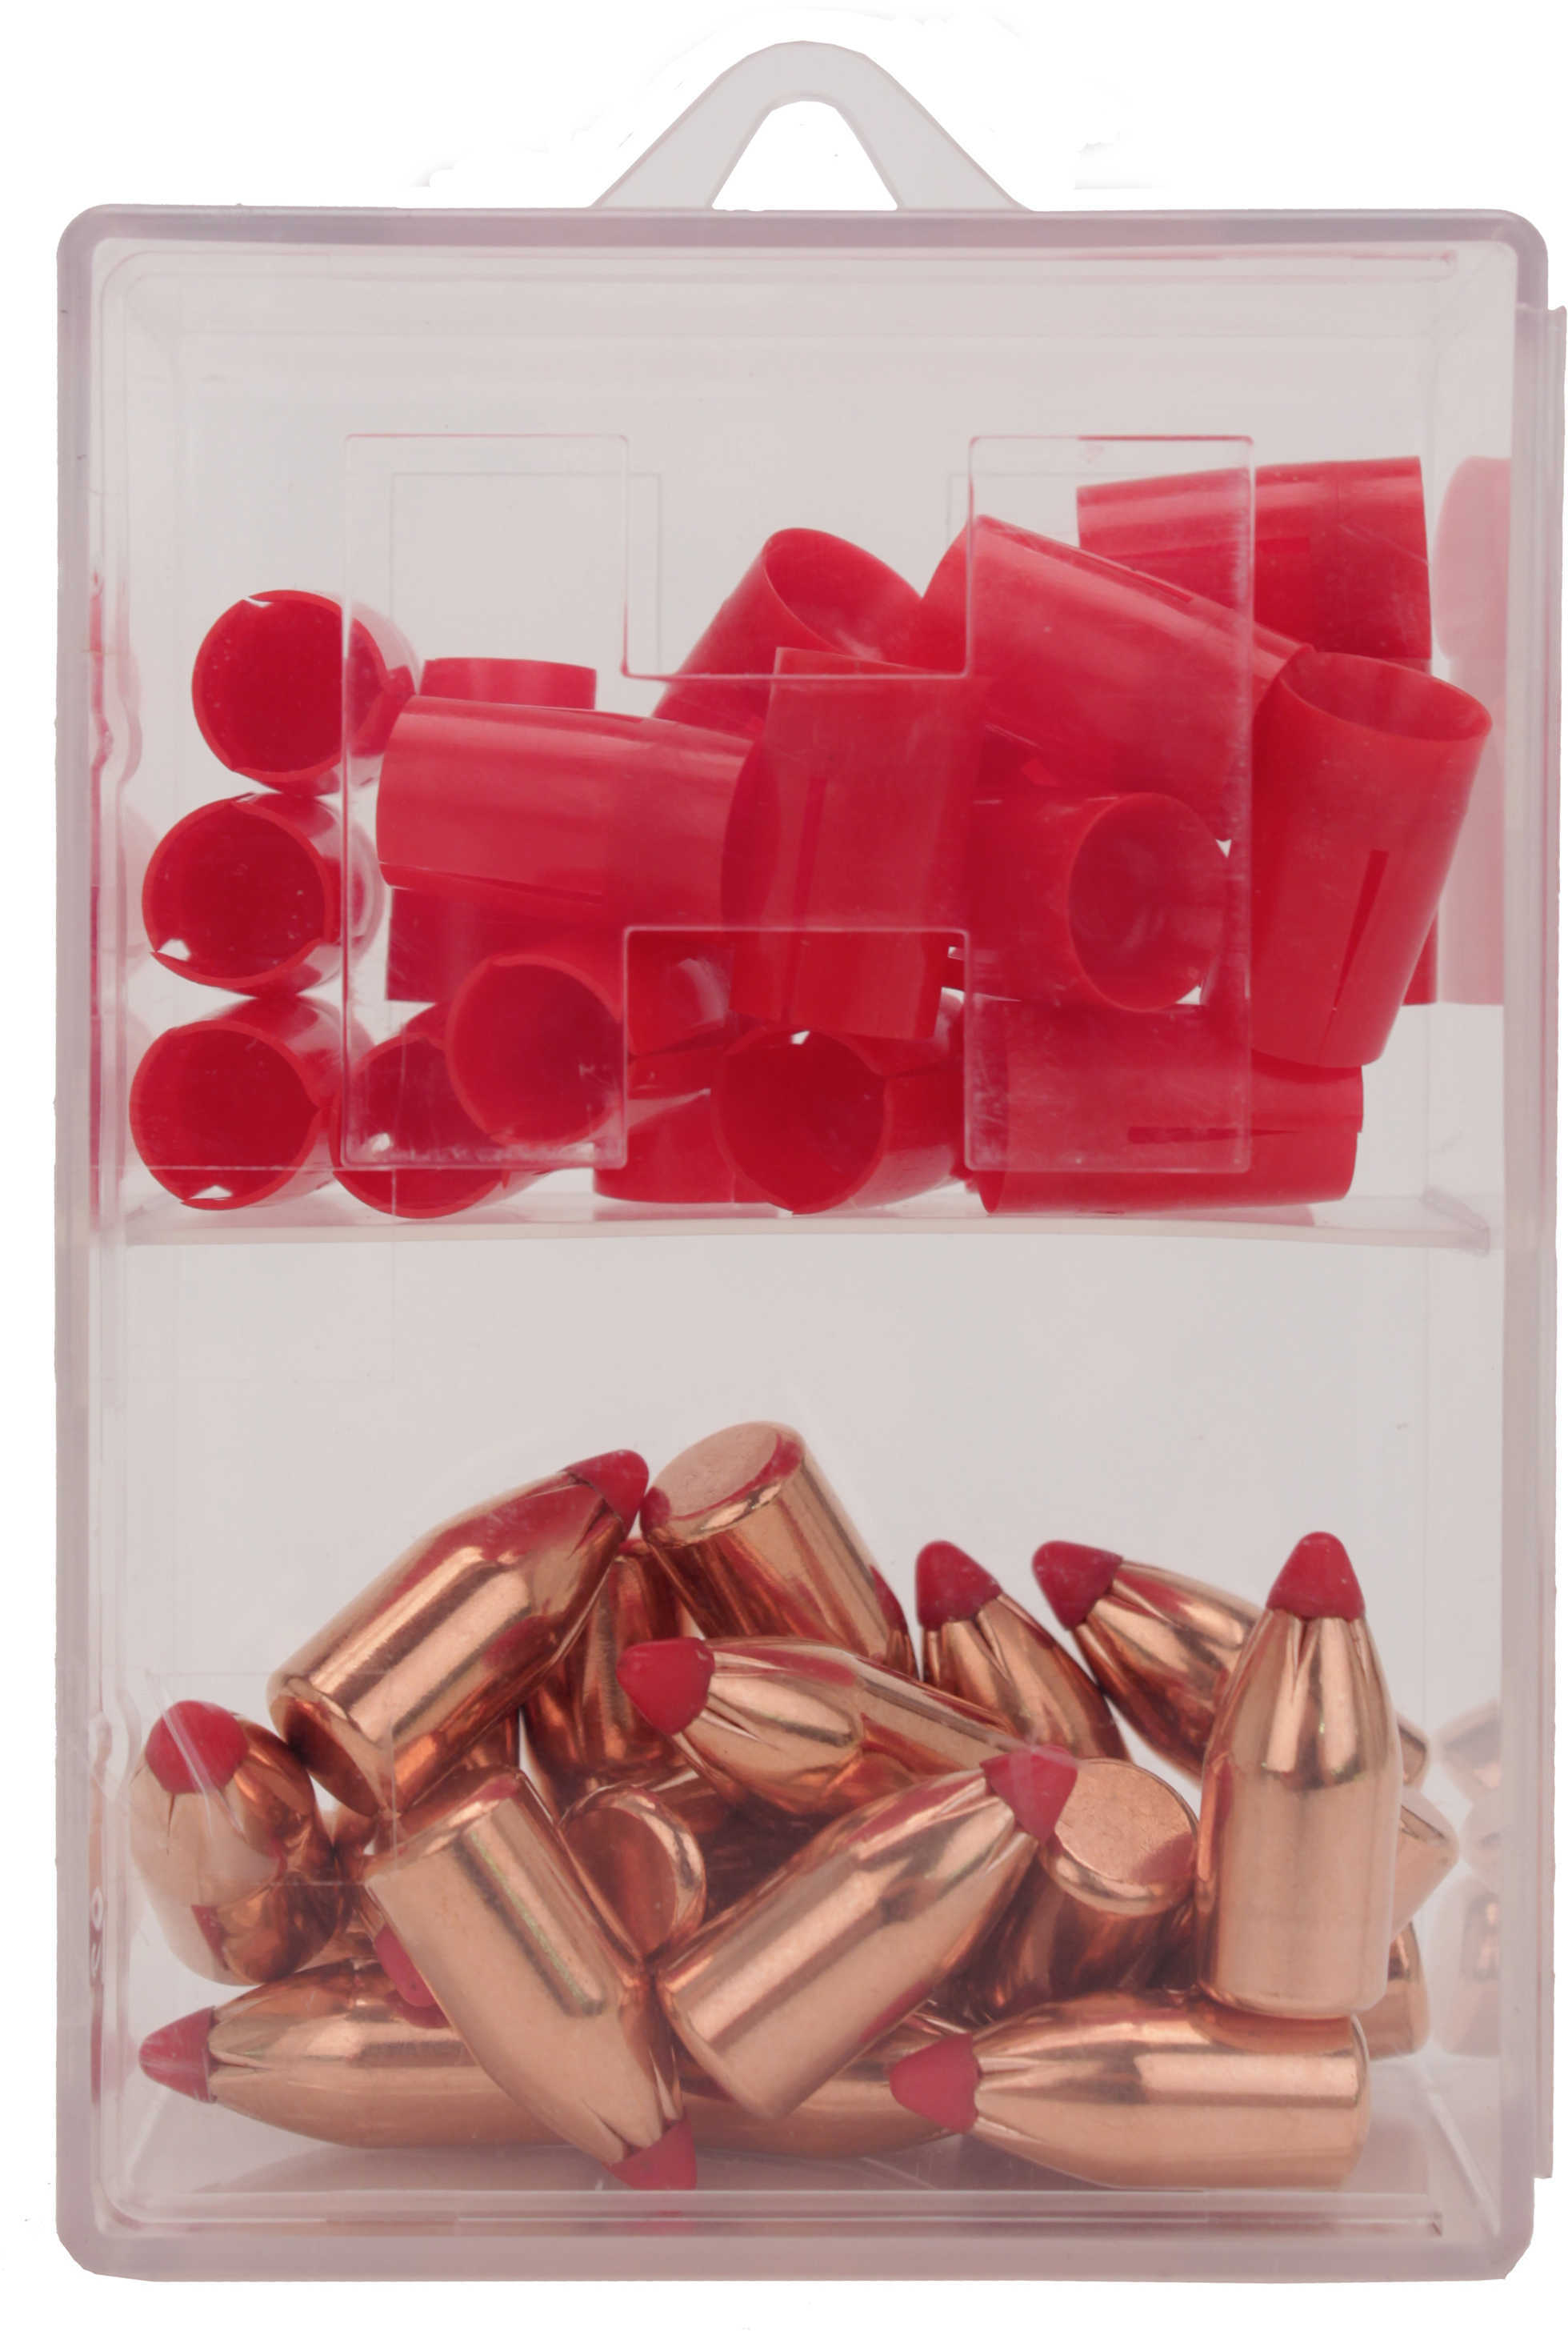 Hornady 50 Caliber Sabot Low Drag With 45 300 SST Muzzleloading Bullets 20 Per Box Md: 67263